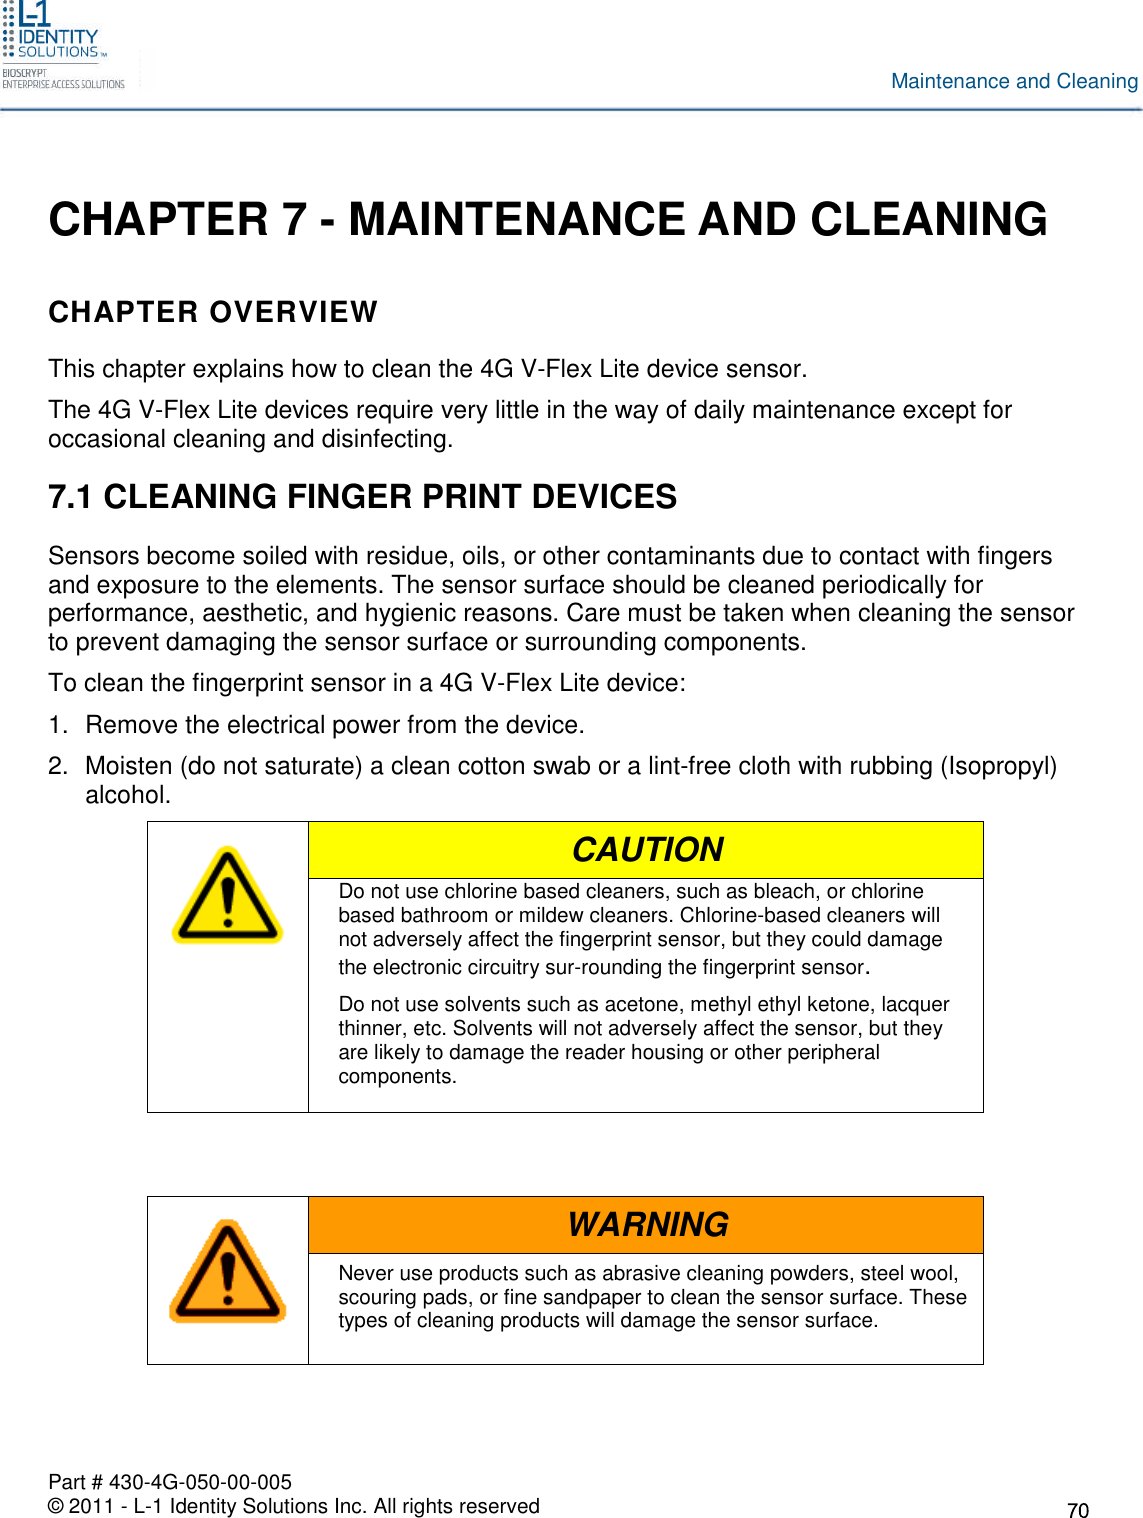 Part # 430-4G-050-00-005© 2011 - L-1 Identity Solutions Inc. All rights reservedMaintenance and CleaningCHAPTER 7 - MAINTENANCE AND CLEANINGCHAPTER OVERVIEWThis chapter explains how to clean the 4G V-Flex Lite device sensor.The 4G V-Flex Lite devices require very little in the way of daily maintenance except foroccasional cleaning and disinfecting.7.1 CLEANING FINGER PRINT DEVICESSensors become soiled with residue, oils, or other contaminants due to contact with fingersand exposure to the elements. The sensor surface should be cleaned periodically forperformance, aesthetic, and hygienic reasons. Care must be taken when cleaning the sensorto prevent damaging the sensor surface or surrounding components.To clean the fingerprint sensor in a 4G V-Flex Lite device:1. Remove the electrical power from the device.2. Moisten (do not saturate) a clean cotton swab or a lint-free cloth with rubbing (Isopropyl)alcohol.CAUTIONDo not use chlorine based cleaners, such as bleach, or chlorinebased bathroom or mildew cleaners. Chlorine-based cleaners willnot adversely affect the fingerprint sensor, but they could damagethe electronic circuitry sur-rounding the fingerprint sensor.Do not use solvents such as acetone, methyl ethyl ketone, lacquerthinner, etc. Solvents will not adversely affect the sensor, but theyare likely to damage the reader housing or other peripheralcomponents.WARNINGNever use products such as abrasive cleaning powders, steel wool,scouring pads, or fine sandpaper to clean the sensor surface. Thesetypes of cleaning products will damage the sensor surface.